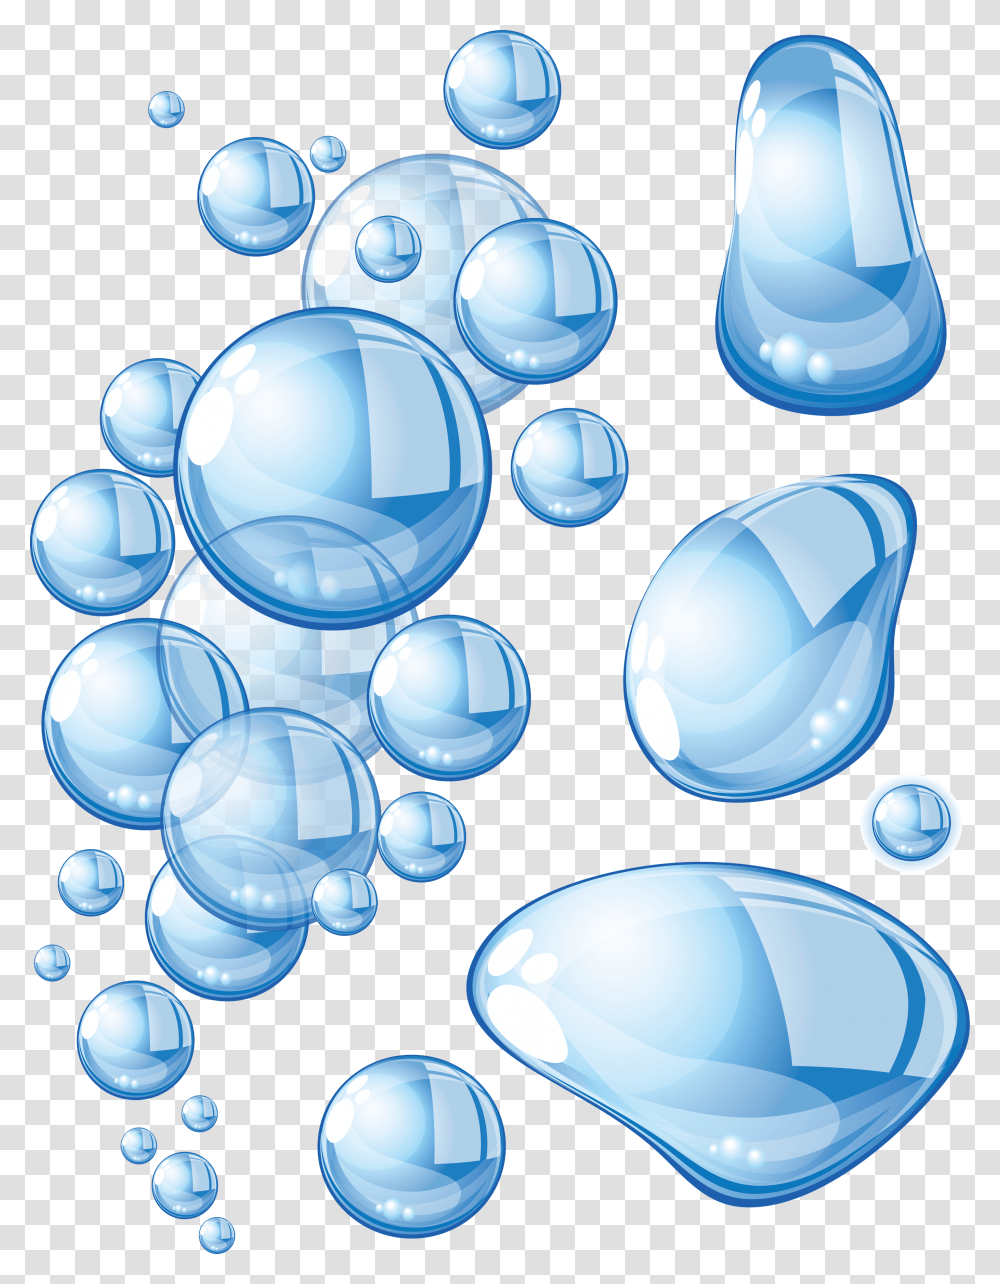 Splash Clipart Fountain Different Shape Of Water, Sphere, Bubble, Network Transparent Png